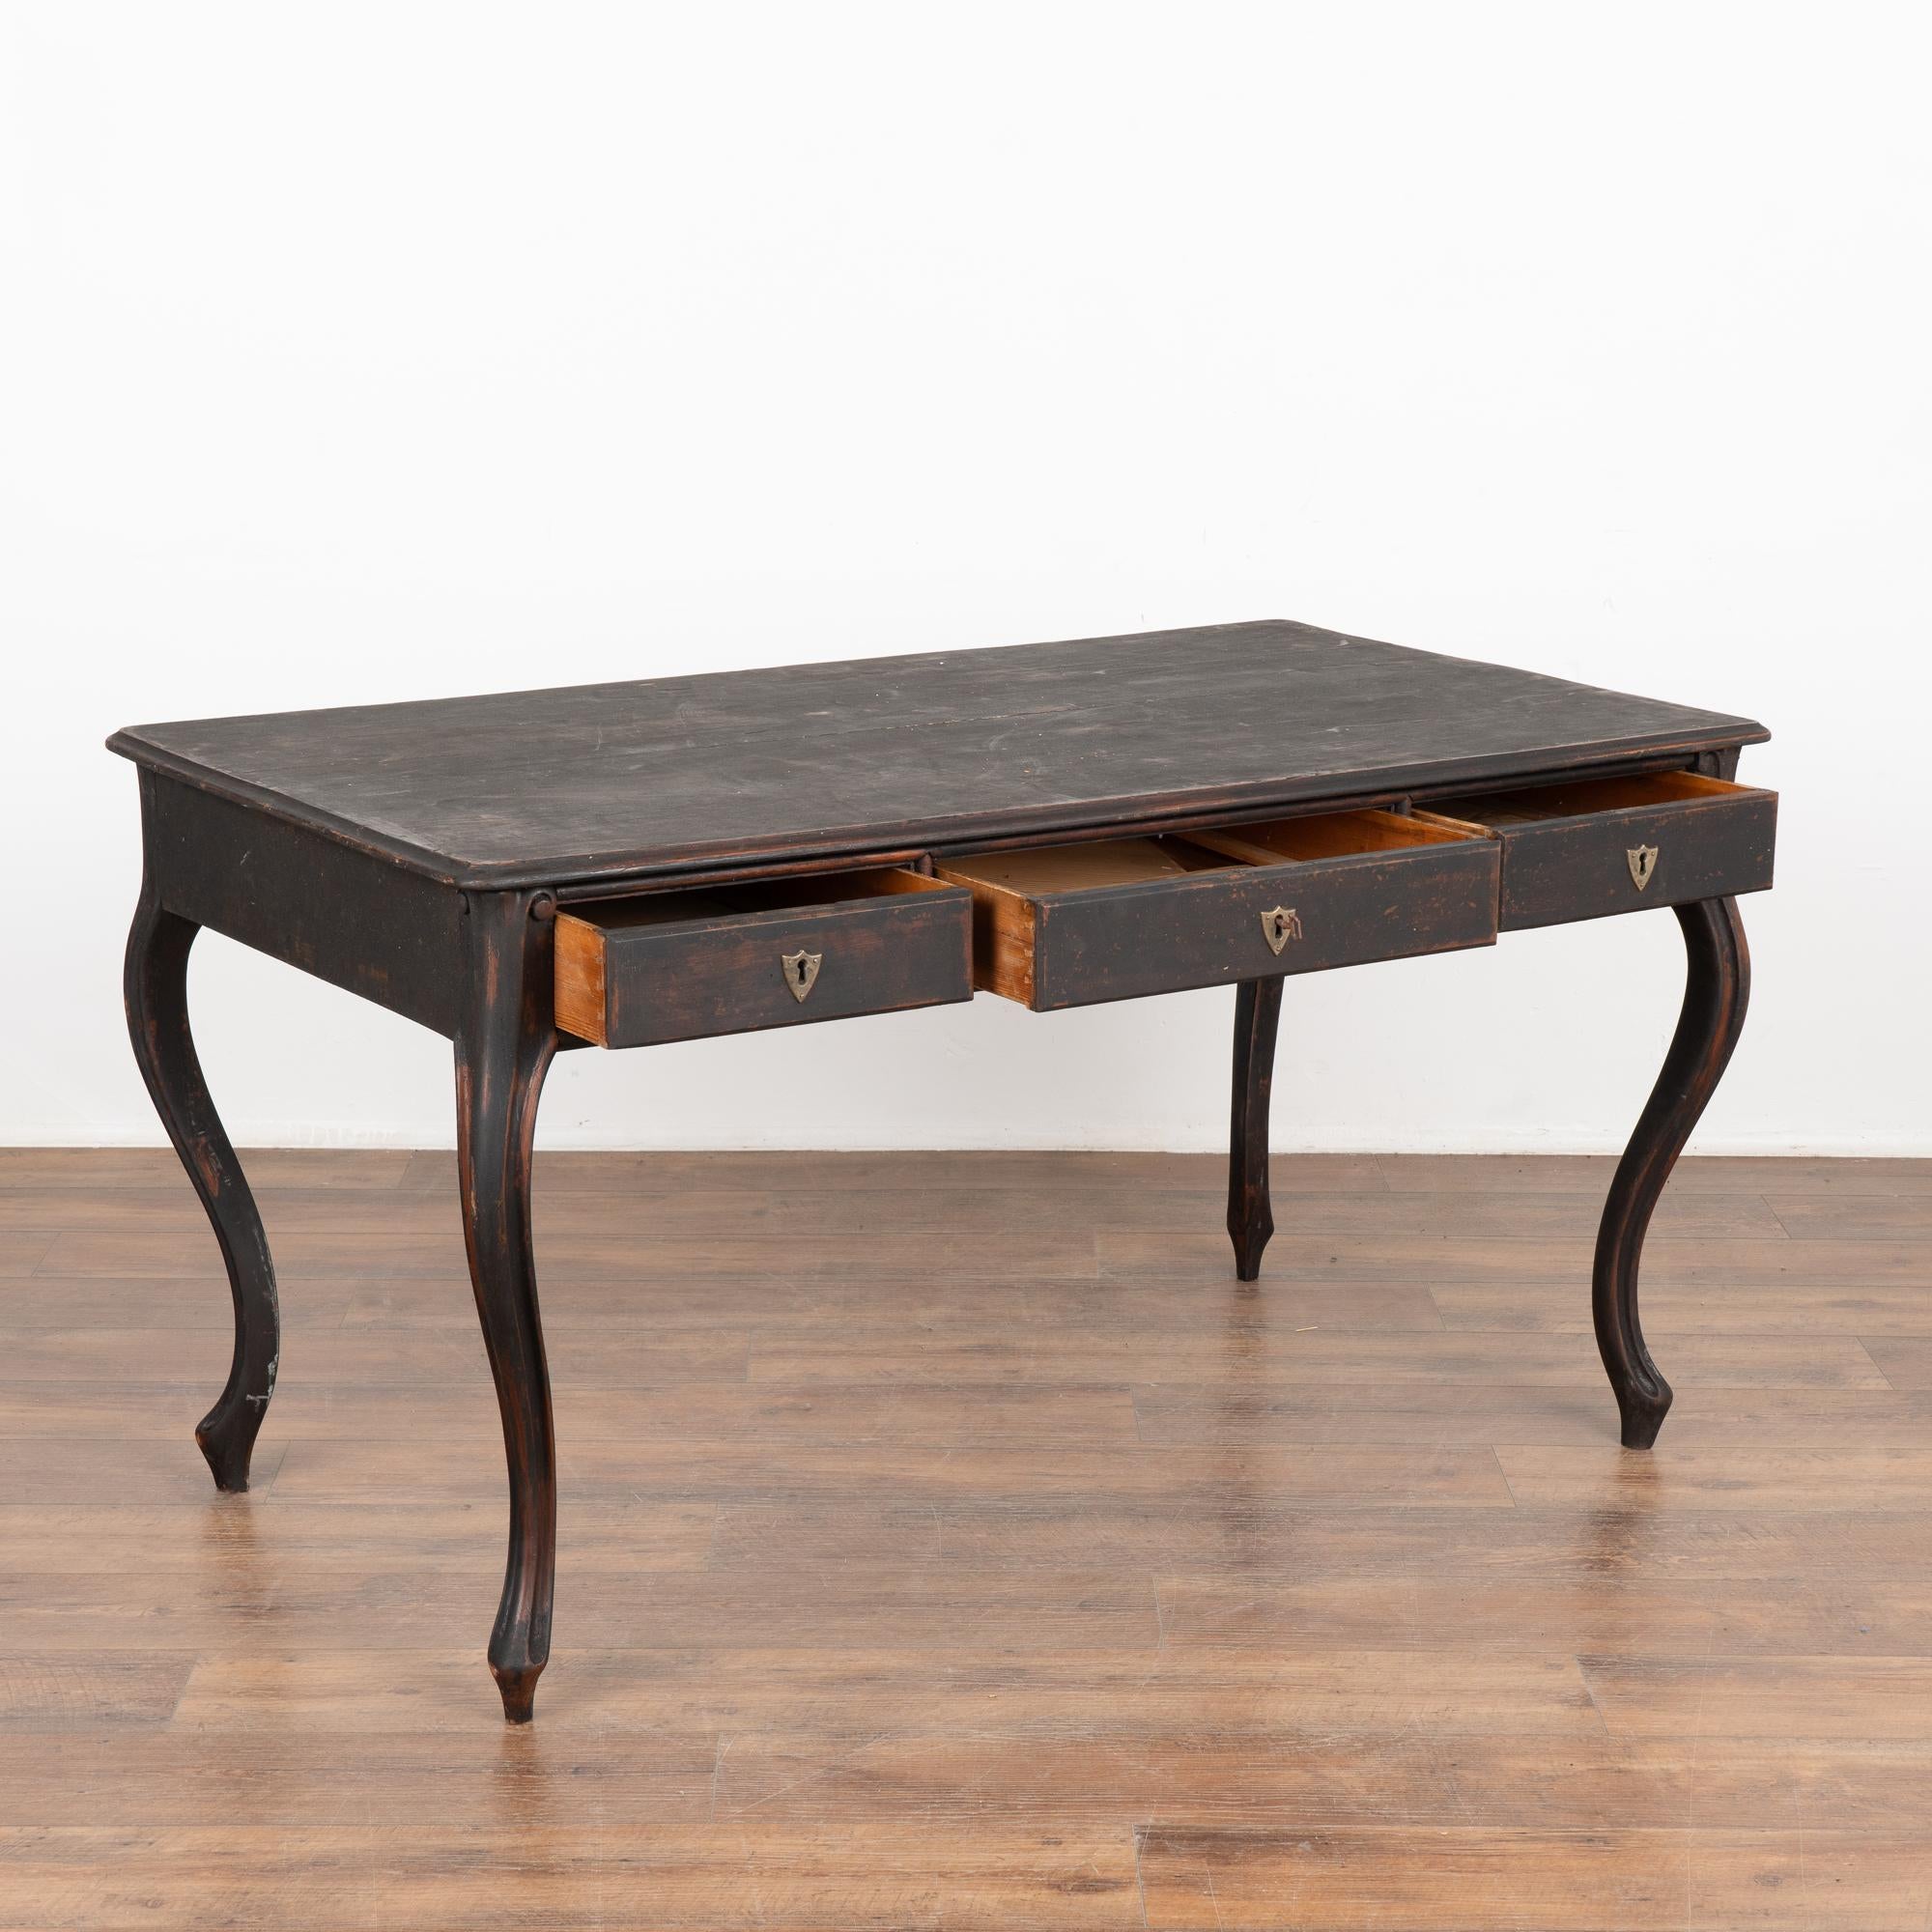 French Provincial Black Writing Table Desk With Three Drawers, Sweden circa 1900